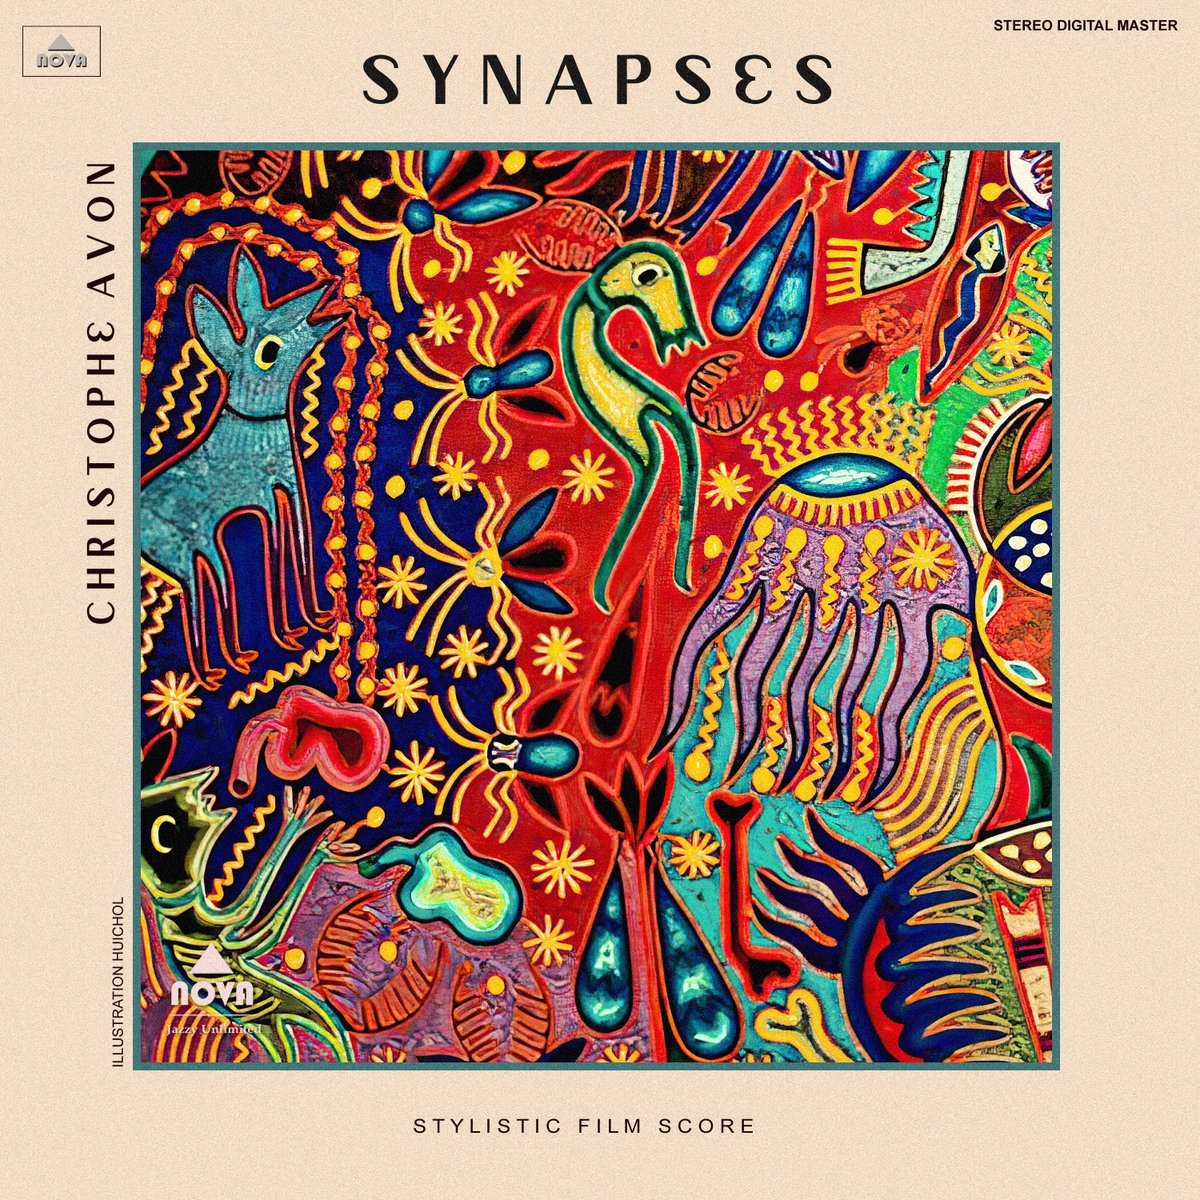 mahn_museum My second new album this year is titled 'Synapses.' For this project, I immersed myself deeply in the realm of jazz fusion, drawing inspiration from giants such as Pat Metheny and Chick Corea. Listen on YouTube: youtube.com/watch?v=alczRX…